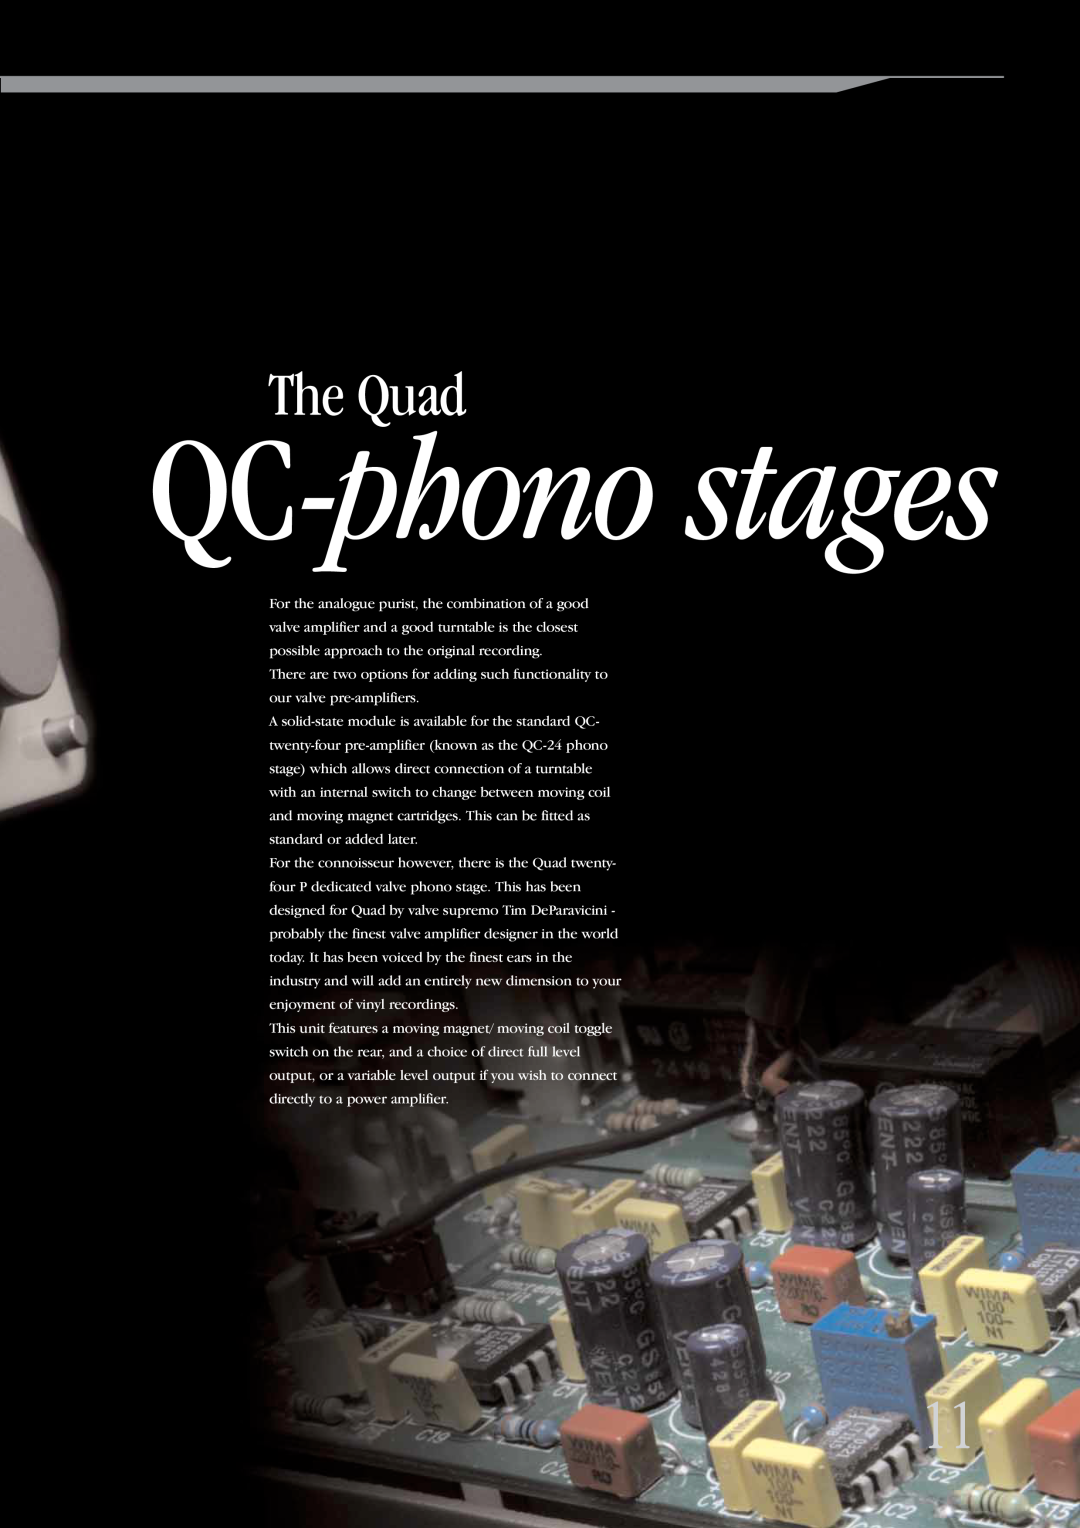 QUAD Vaccume Tube Amplifier Systems manual QC-phonostages, The Quad 